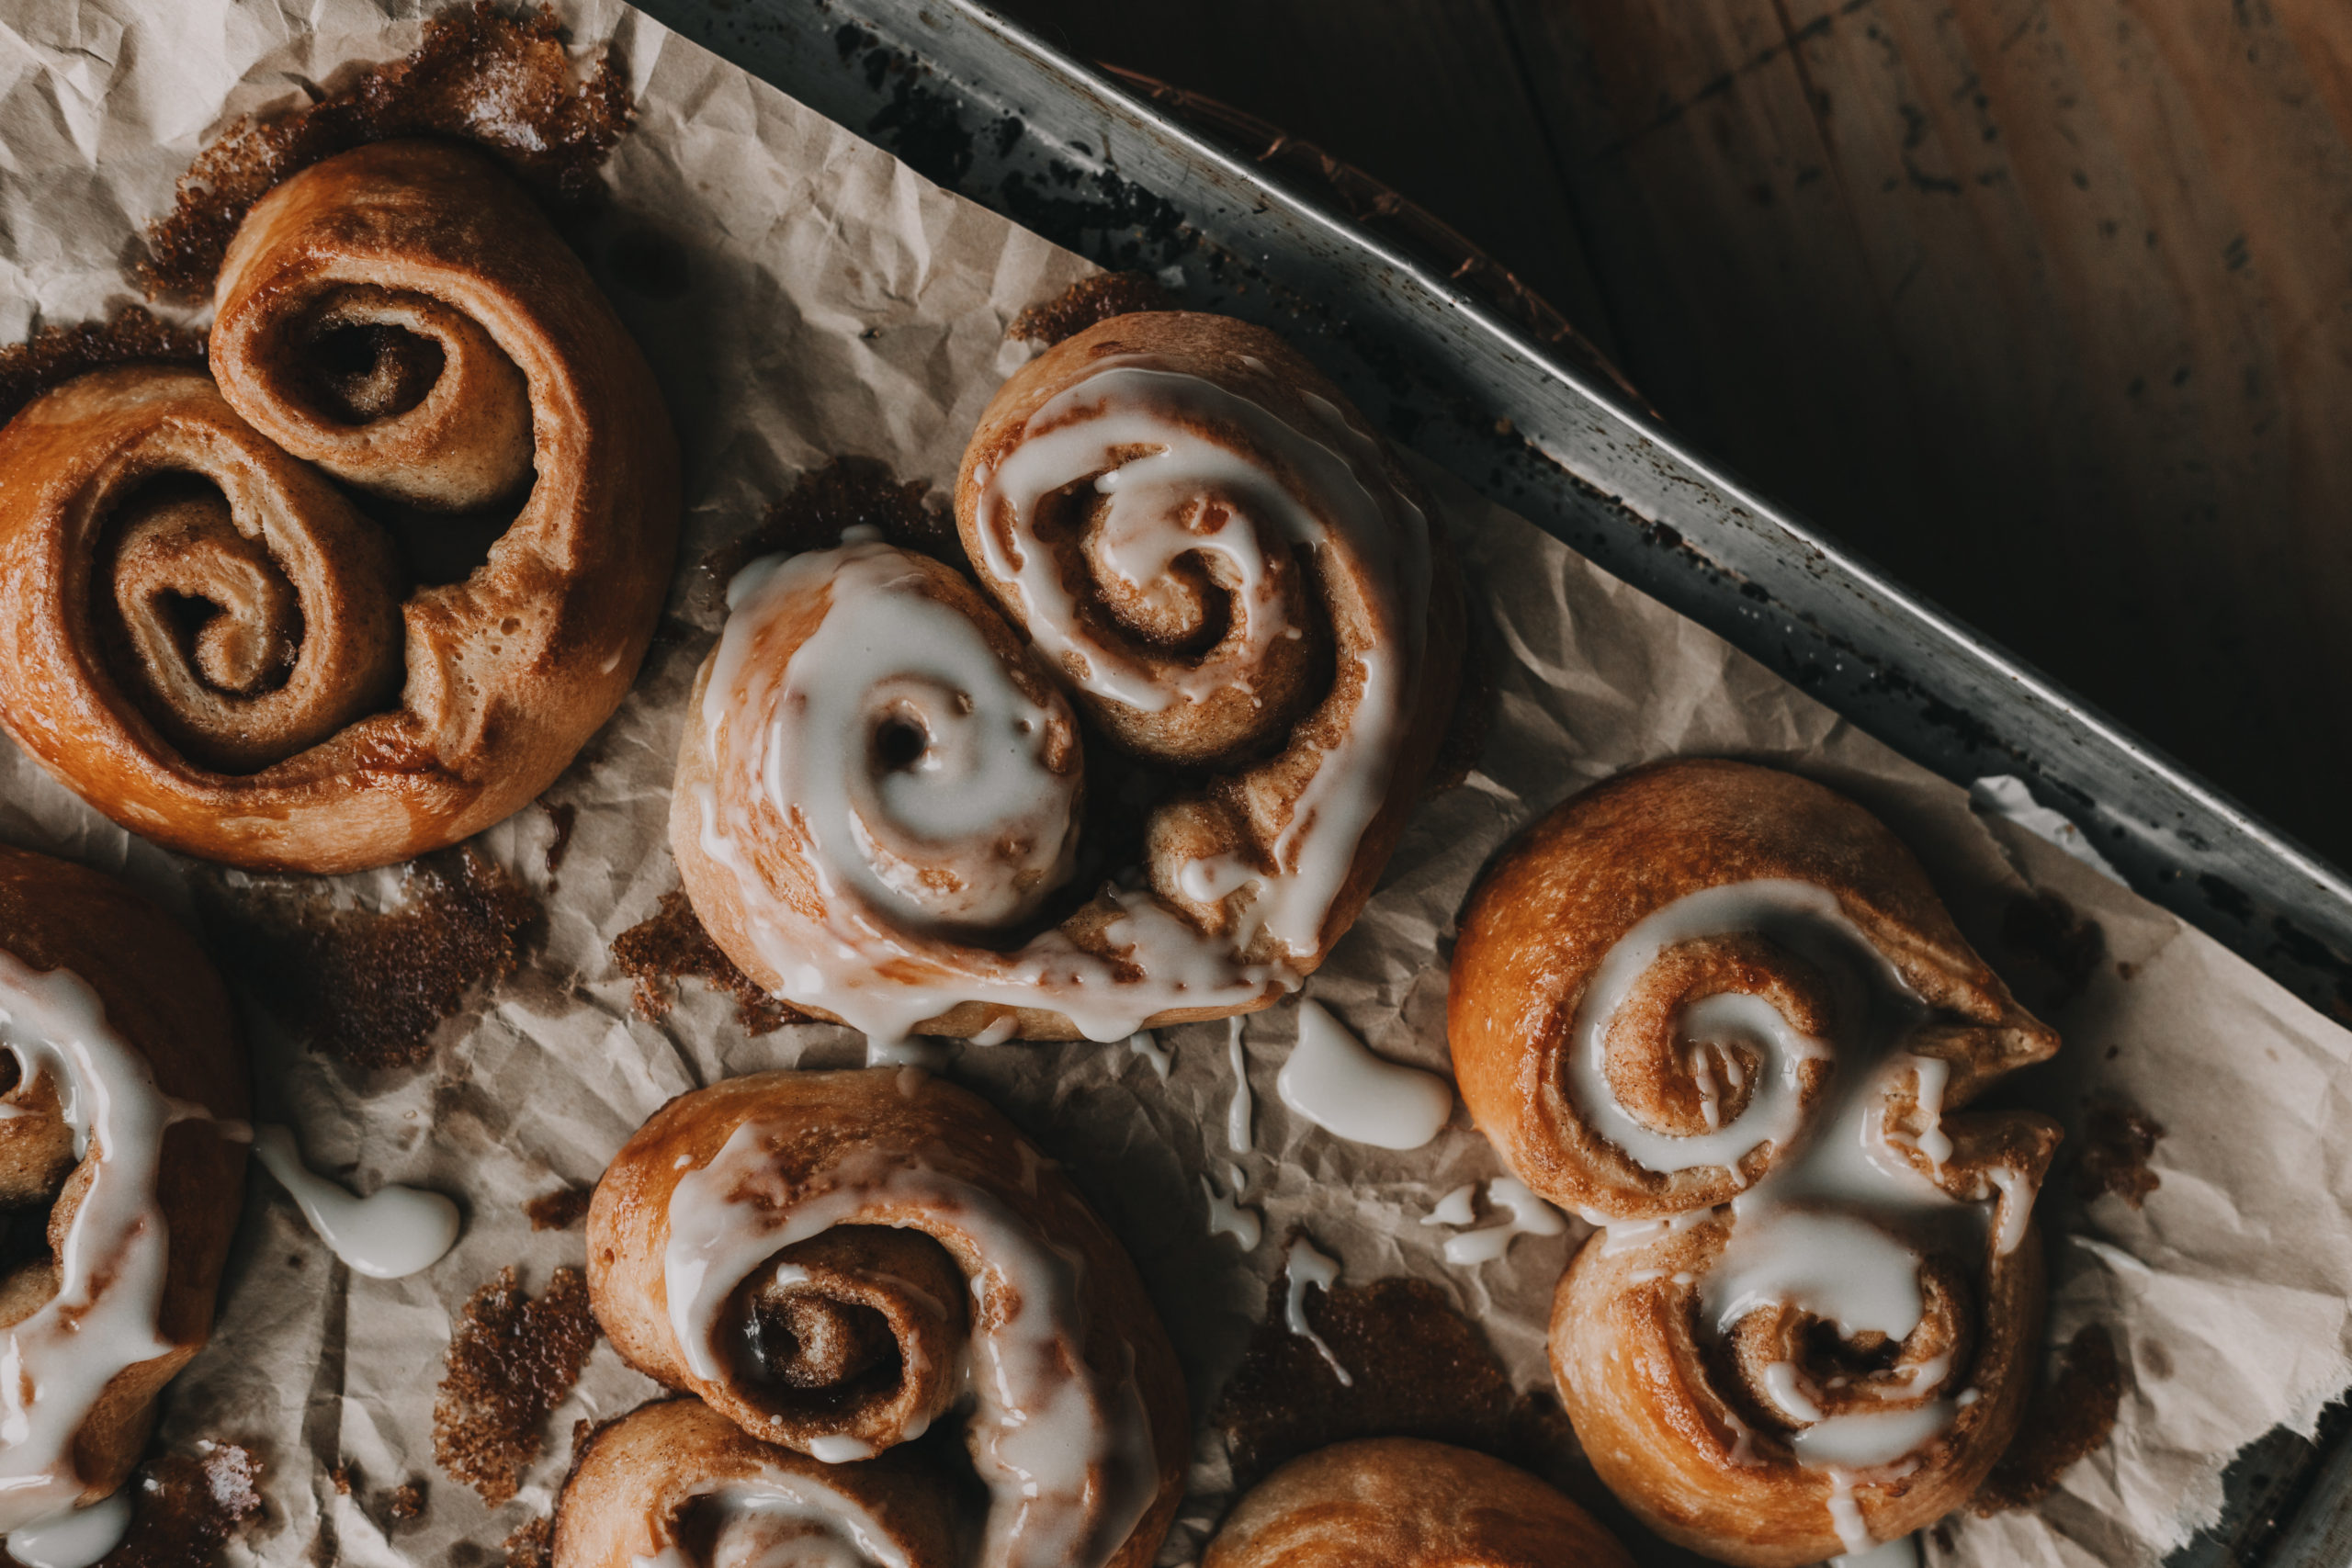 How to Make Heart Shaped Cinnamon Rolls for Valentine's Day